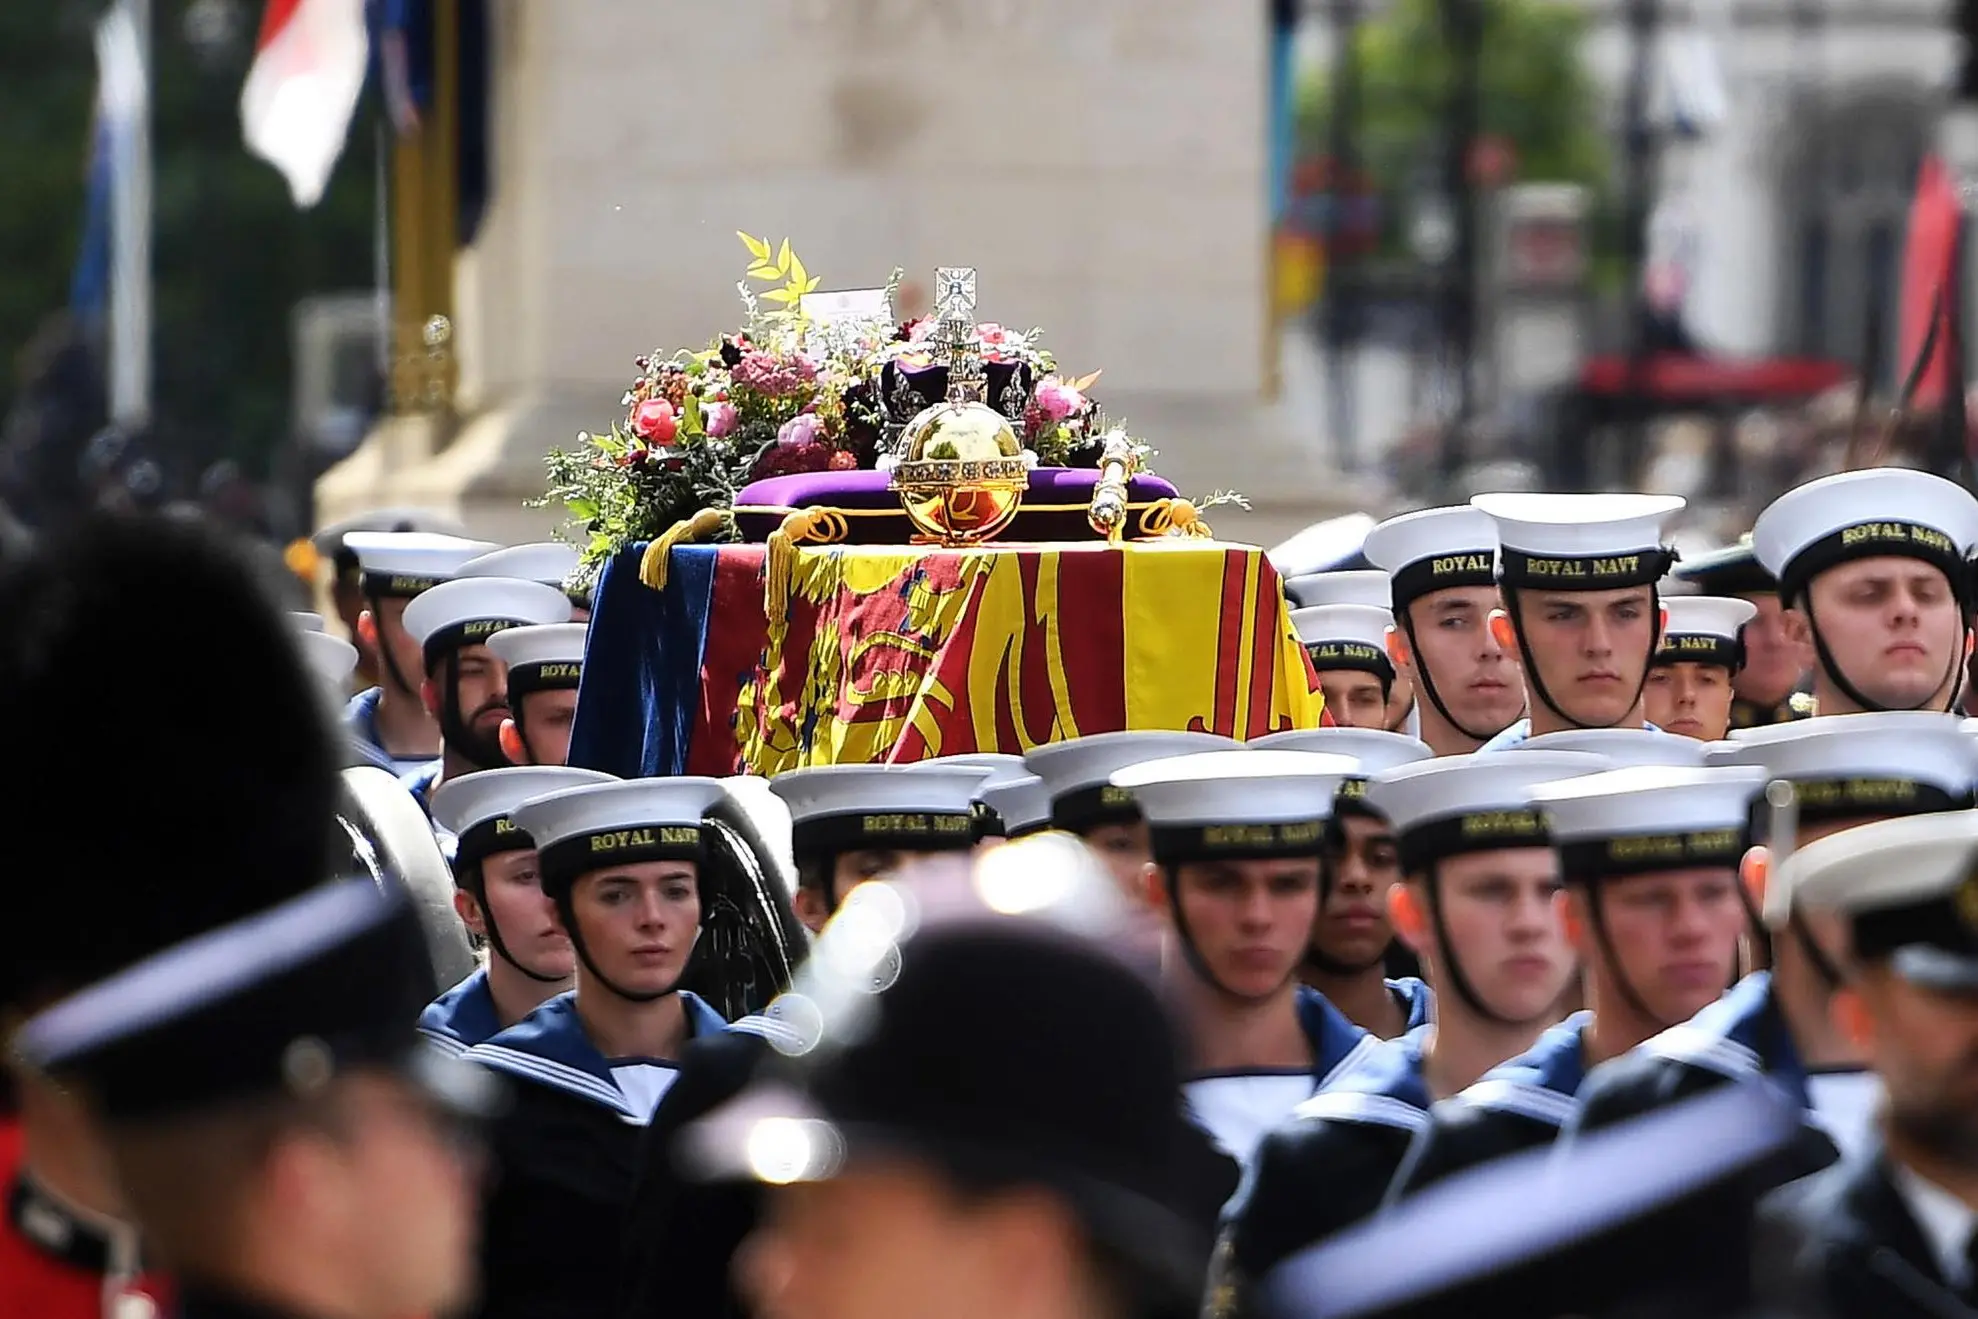 epa10193372 The Royal Household Cavalry and members of the Navy pull the coffin of Queen Elizabeth II along Whitehall during the State Funeral Procession of Queen Elizabeth II in London, Britain, 19 September 2022. Britain's Queen Elizabeth II died at her Scottish estate, Balmoral Castle, on 08 September 2022. Hundreds of delegates from around the world were paying their respects to the late British monarch. The 96-year-old Queen was the longest-reigning monarch in British history. EPA/ANDY RAIN